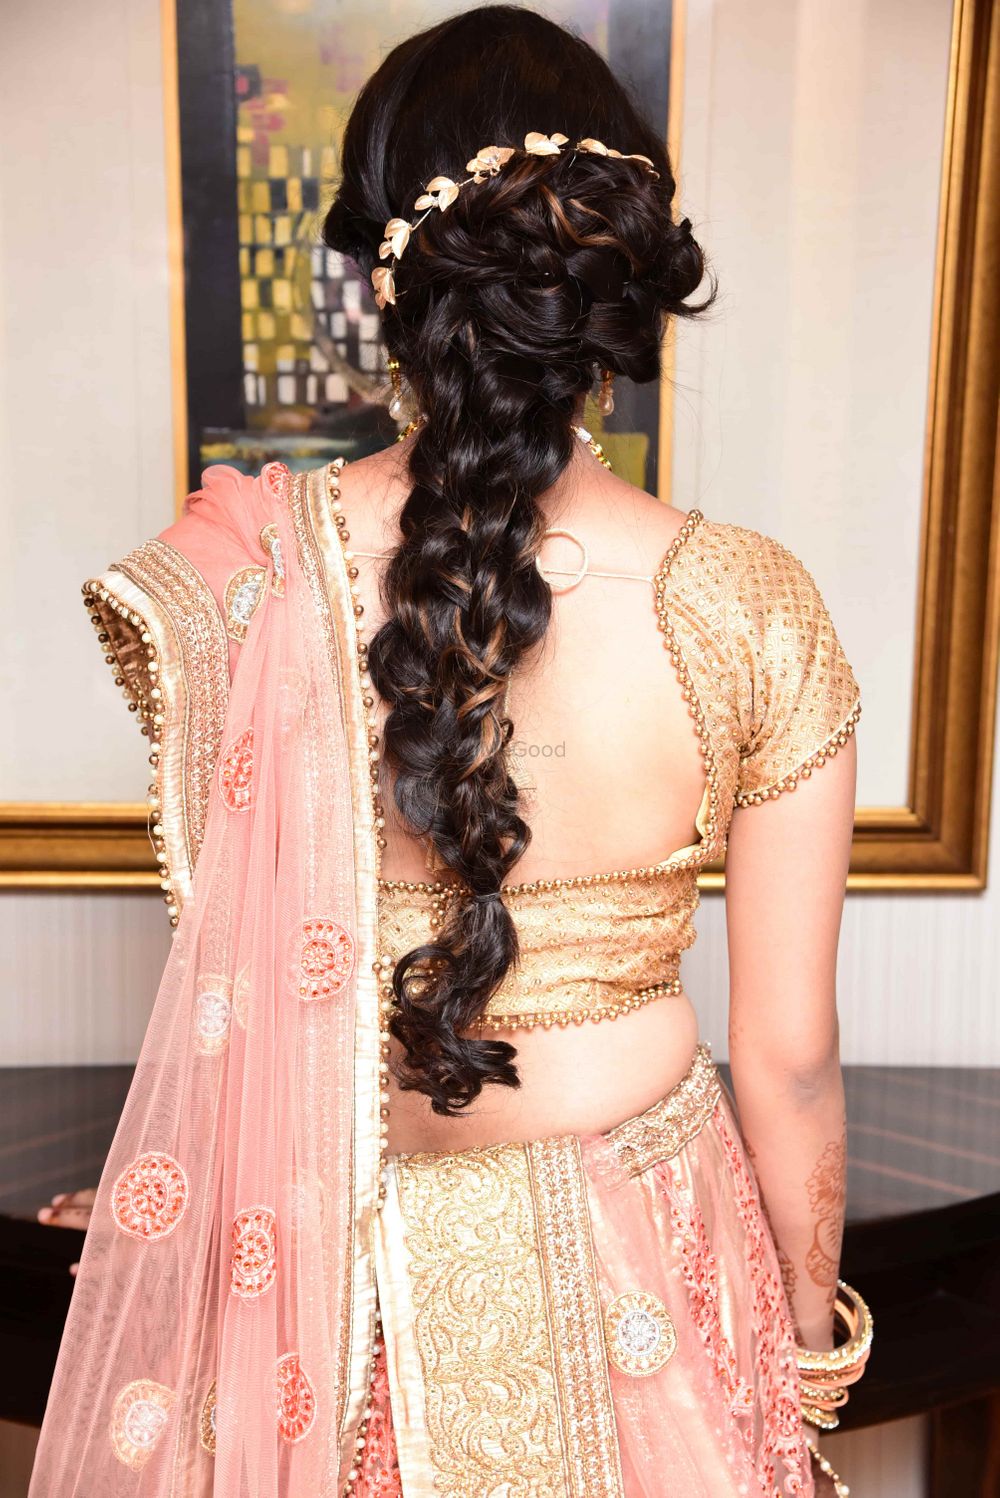 Photo of Engagement hairstyle with braid and hair accessory